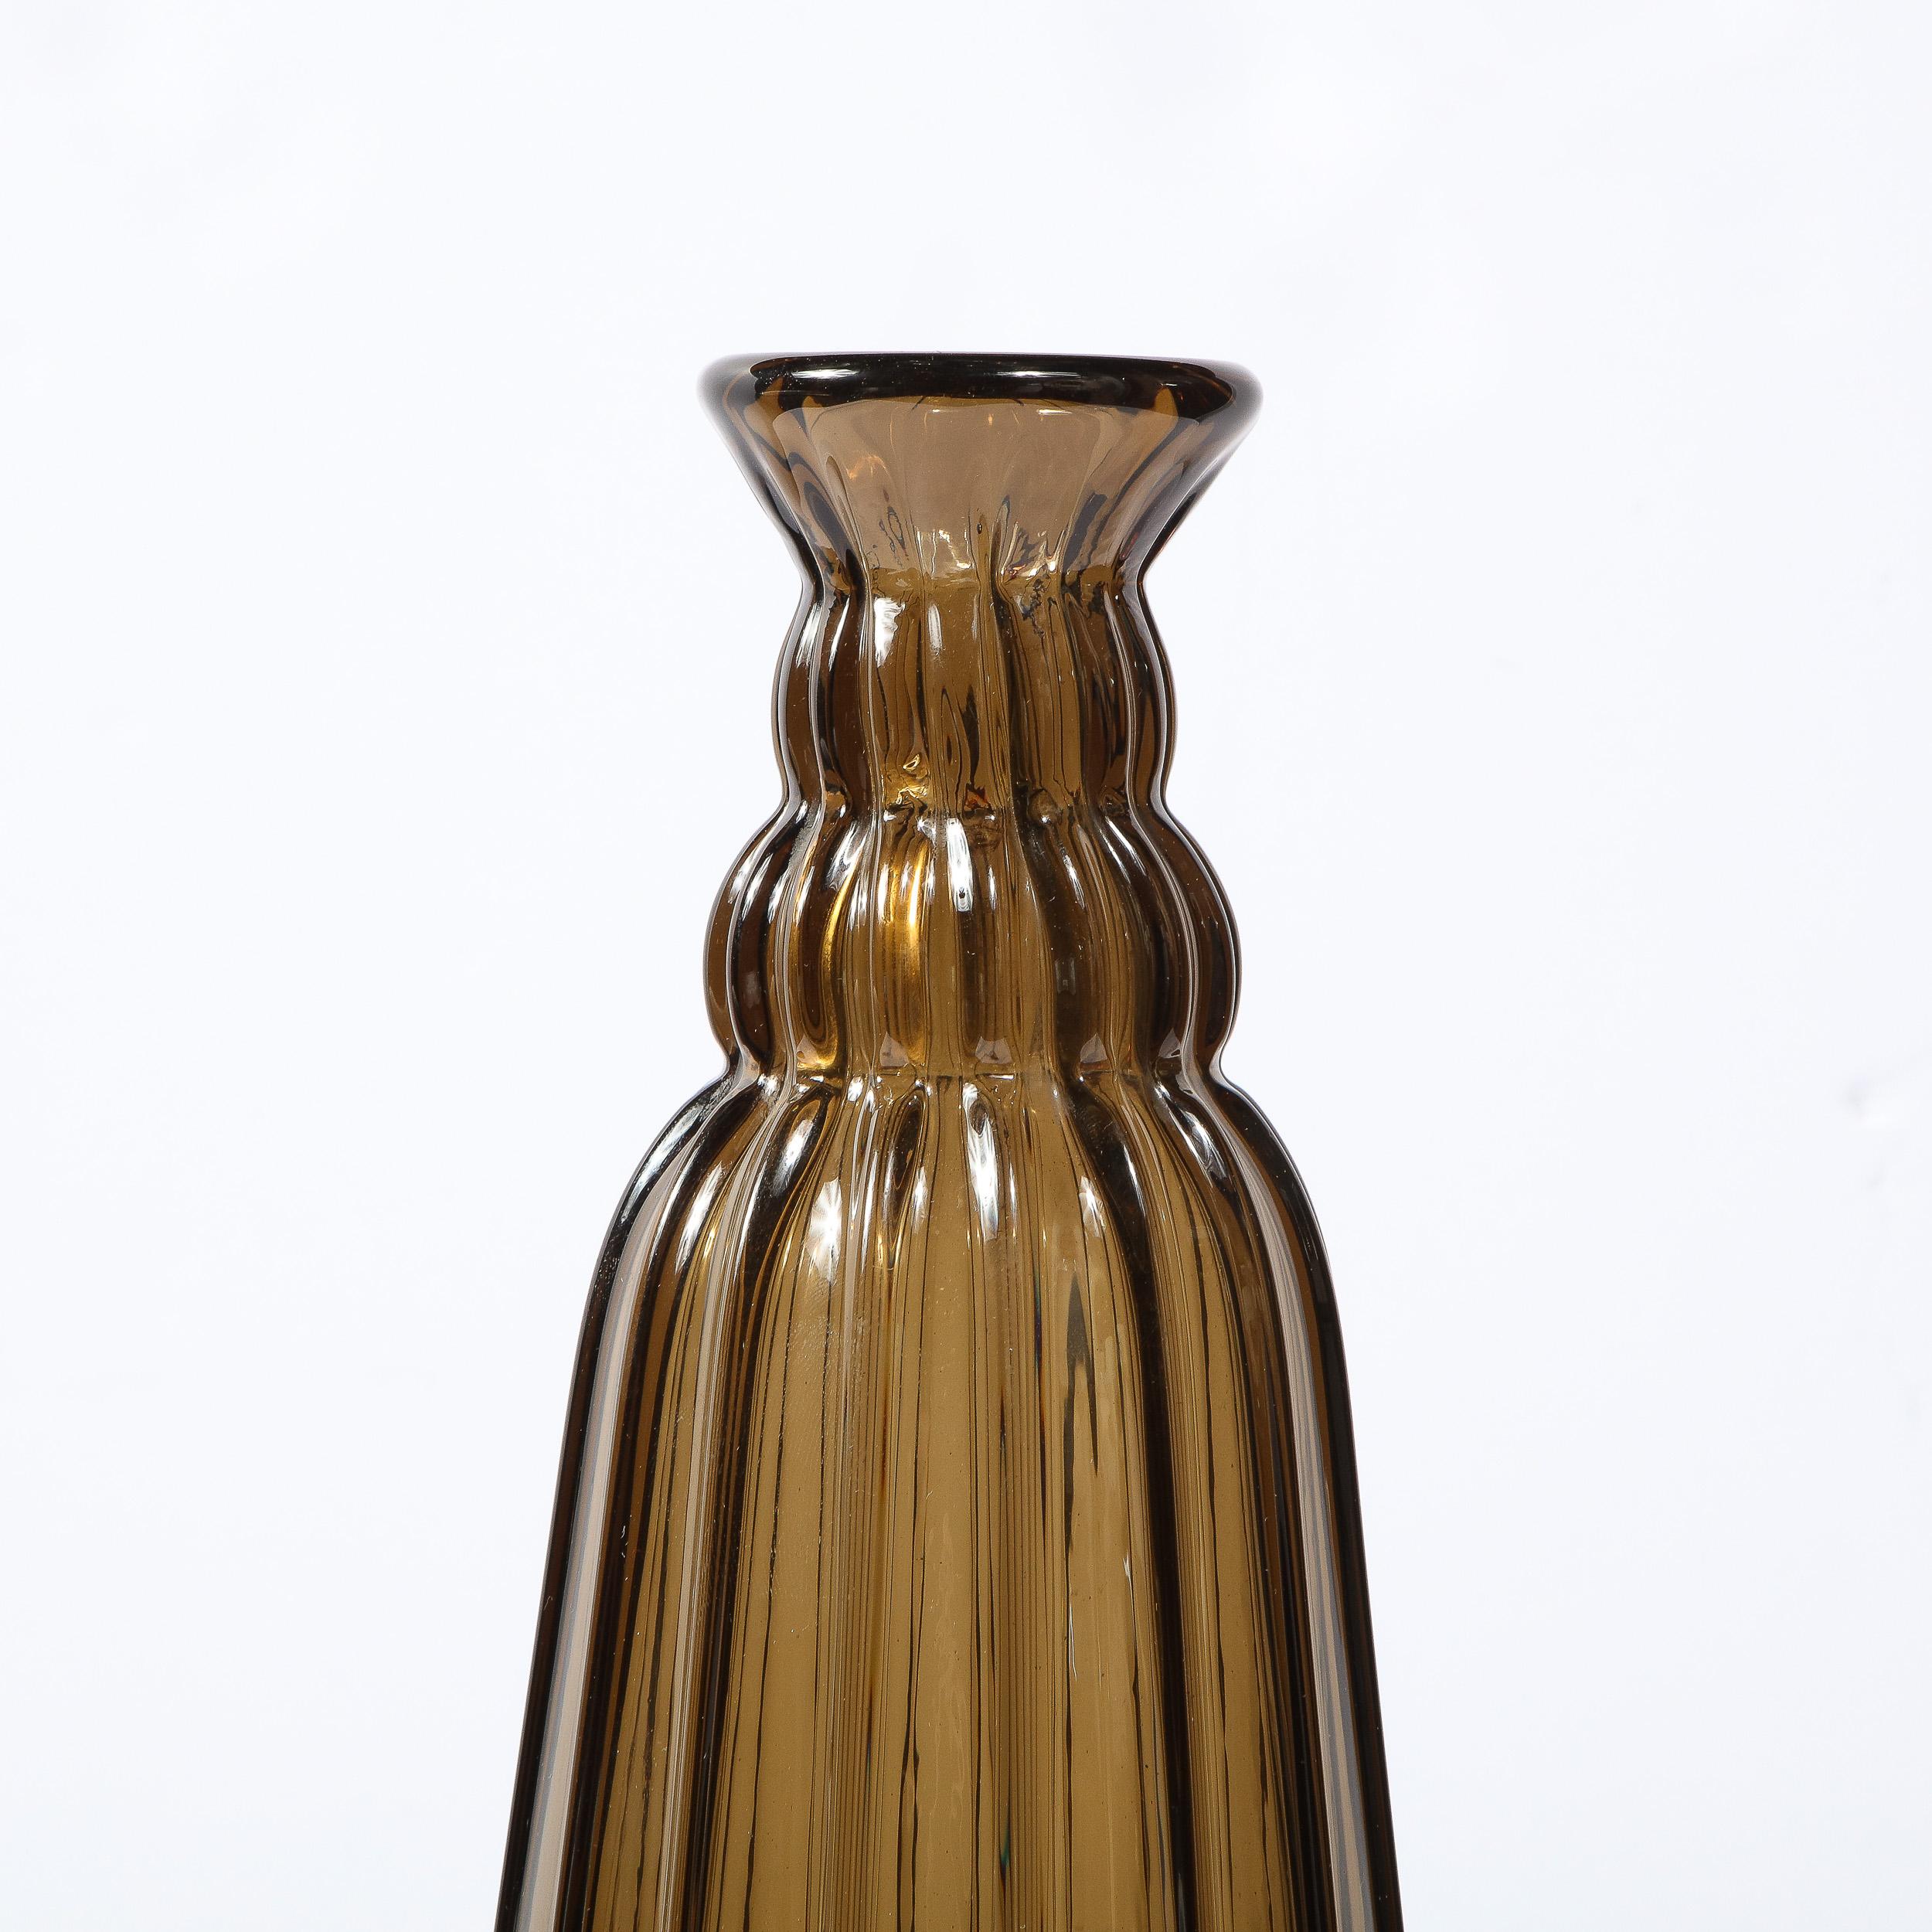 French 1930s Art Deco Topaz Colored Hand Blown Tall Vase, Signed by Daum Nancy France For Sale